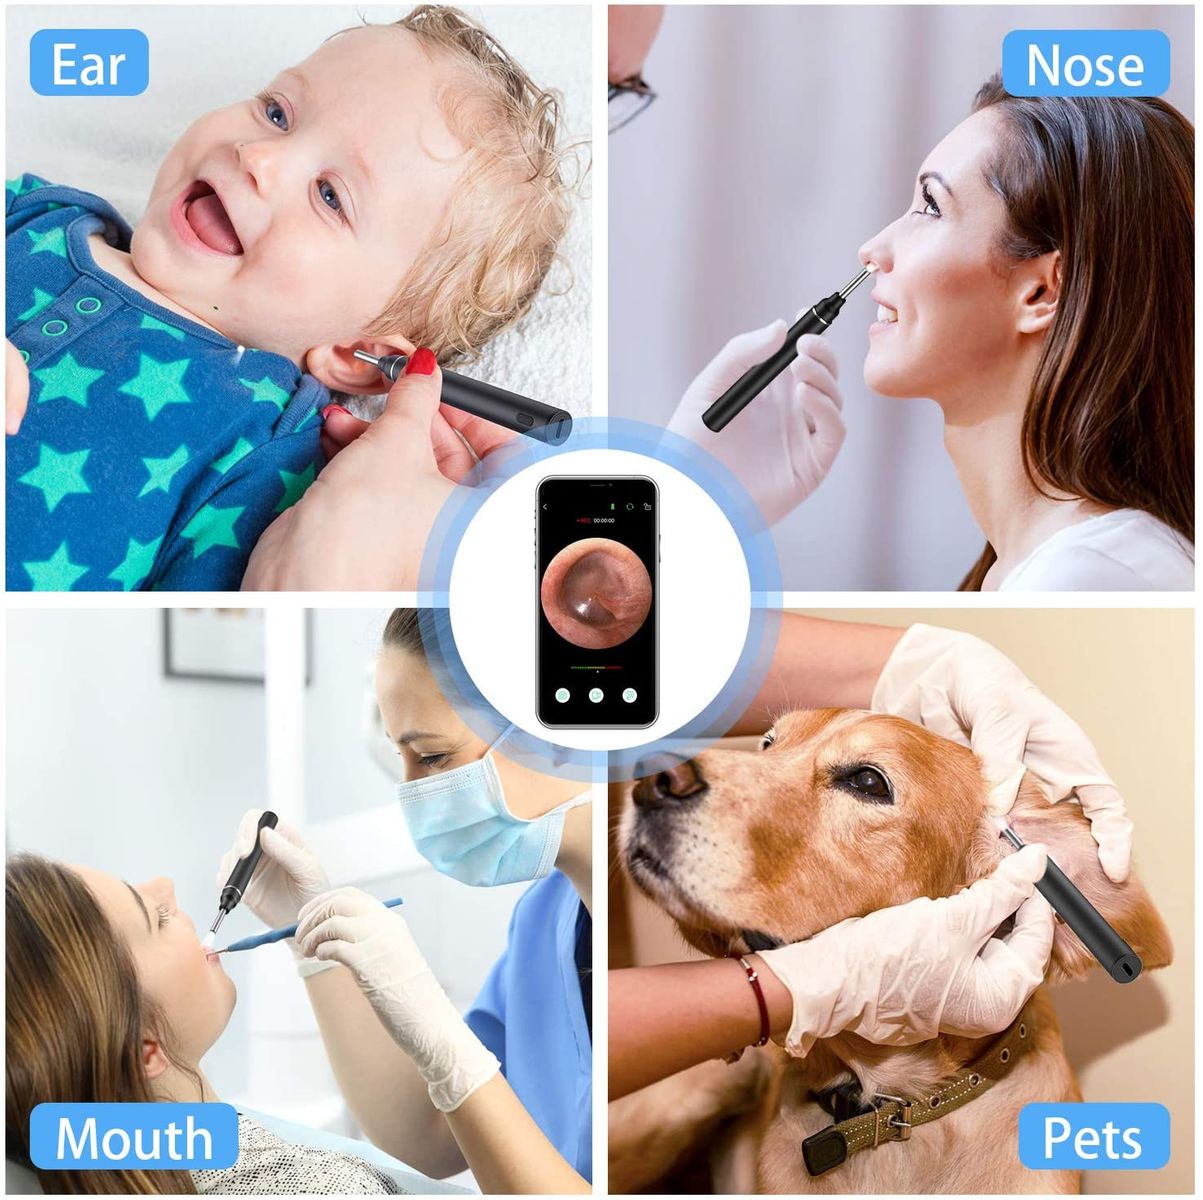 VITCOCO 5.5mm Digital 720P HD WiFi Otoscope Ear Camera with 6 LED Lights, Earwax Remover for iPhone/iPad/iOS/Android, Black-1